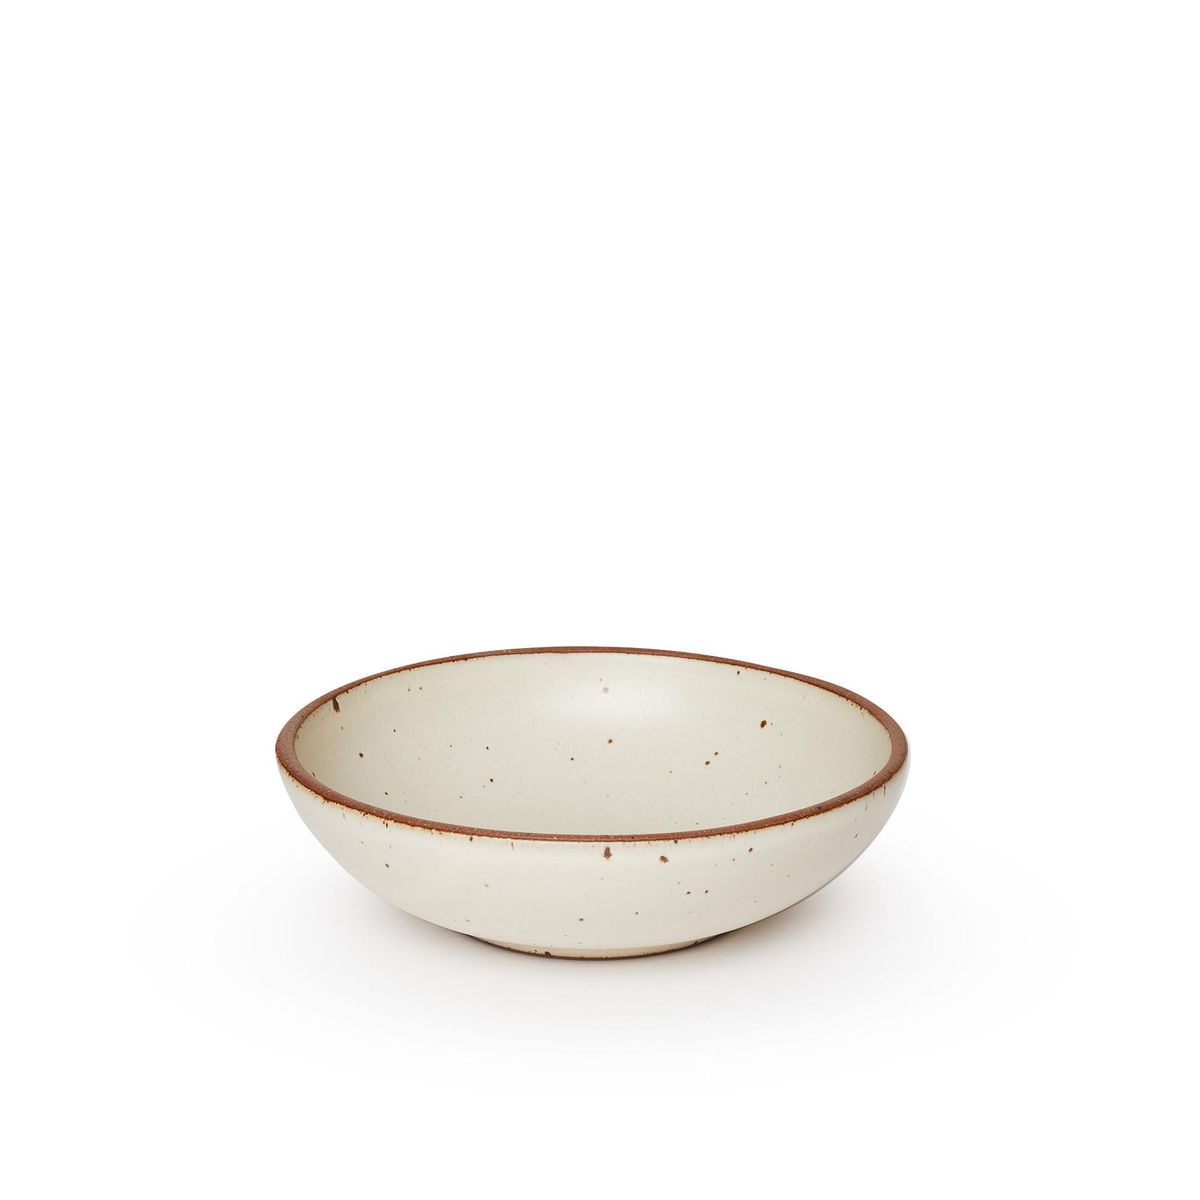 A dinner-sized shallow ceramic bowl in a warm, tan-toned, off-white color featuring iron speckles and an unglazed rim